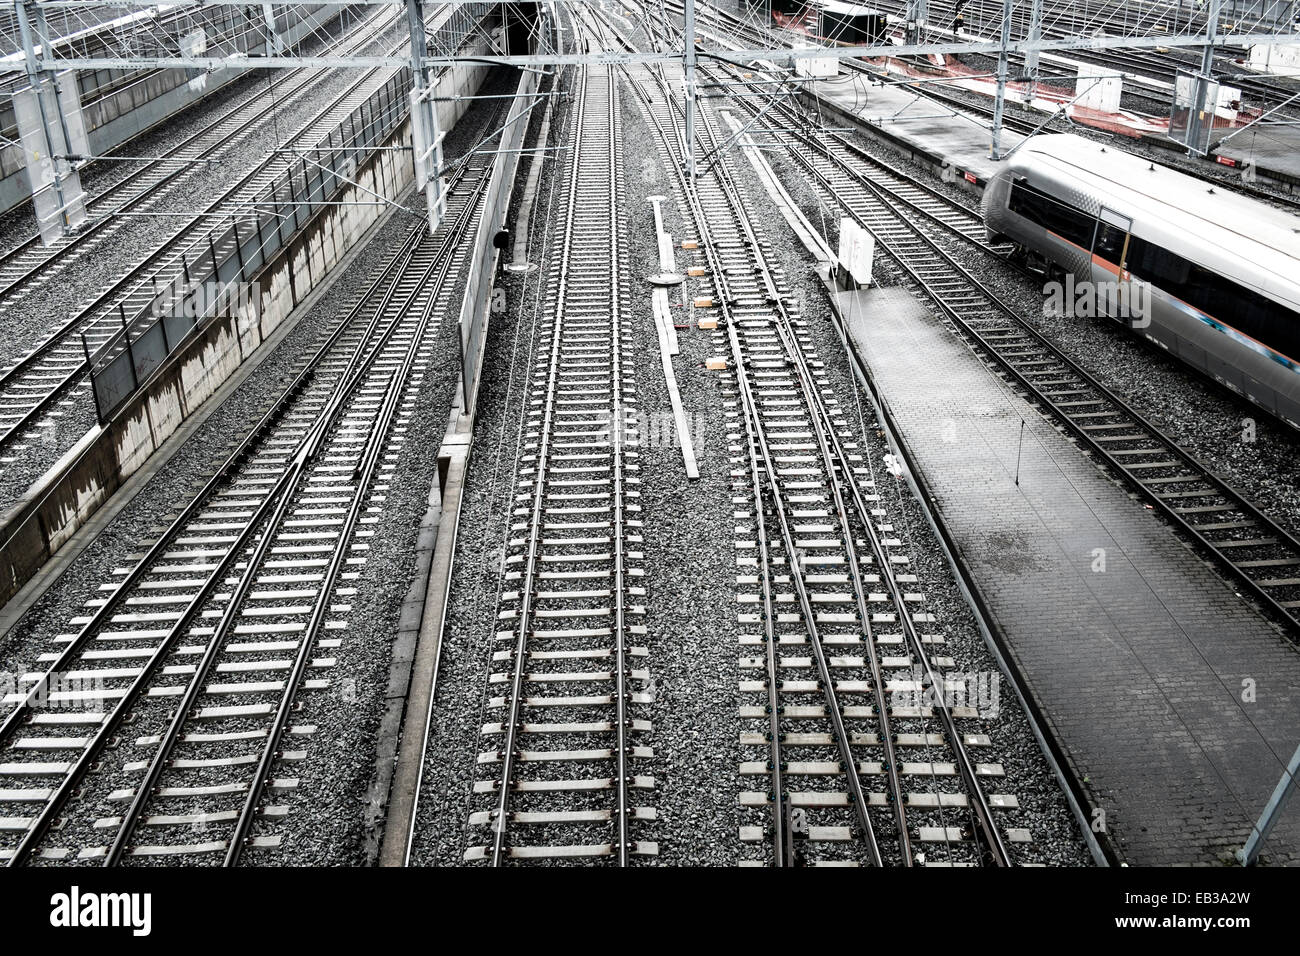 Norway, Oslo, Elevated view of railway tracks with passing high-speed train Stock Photo